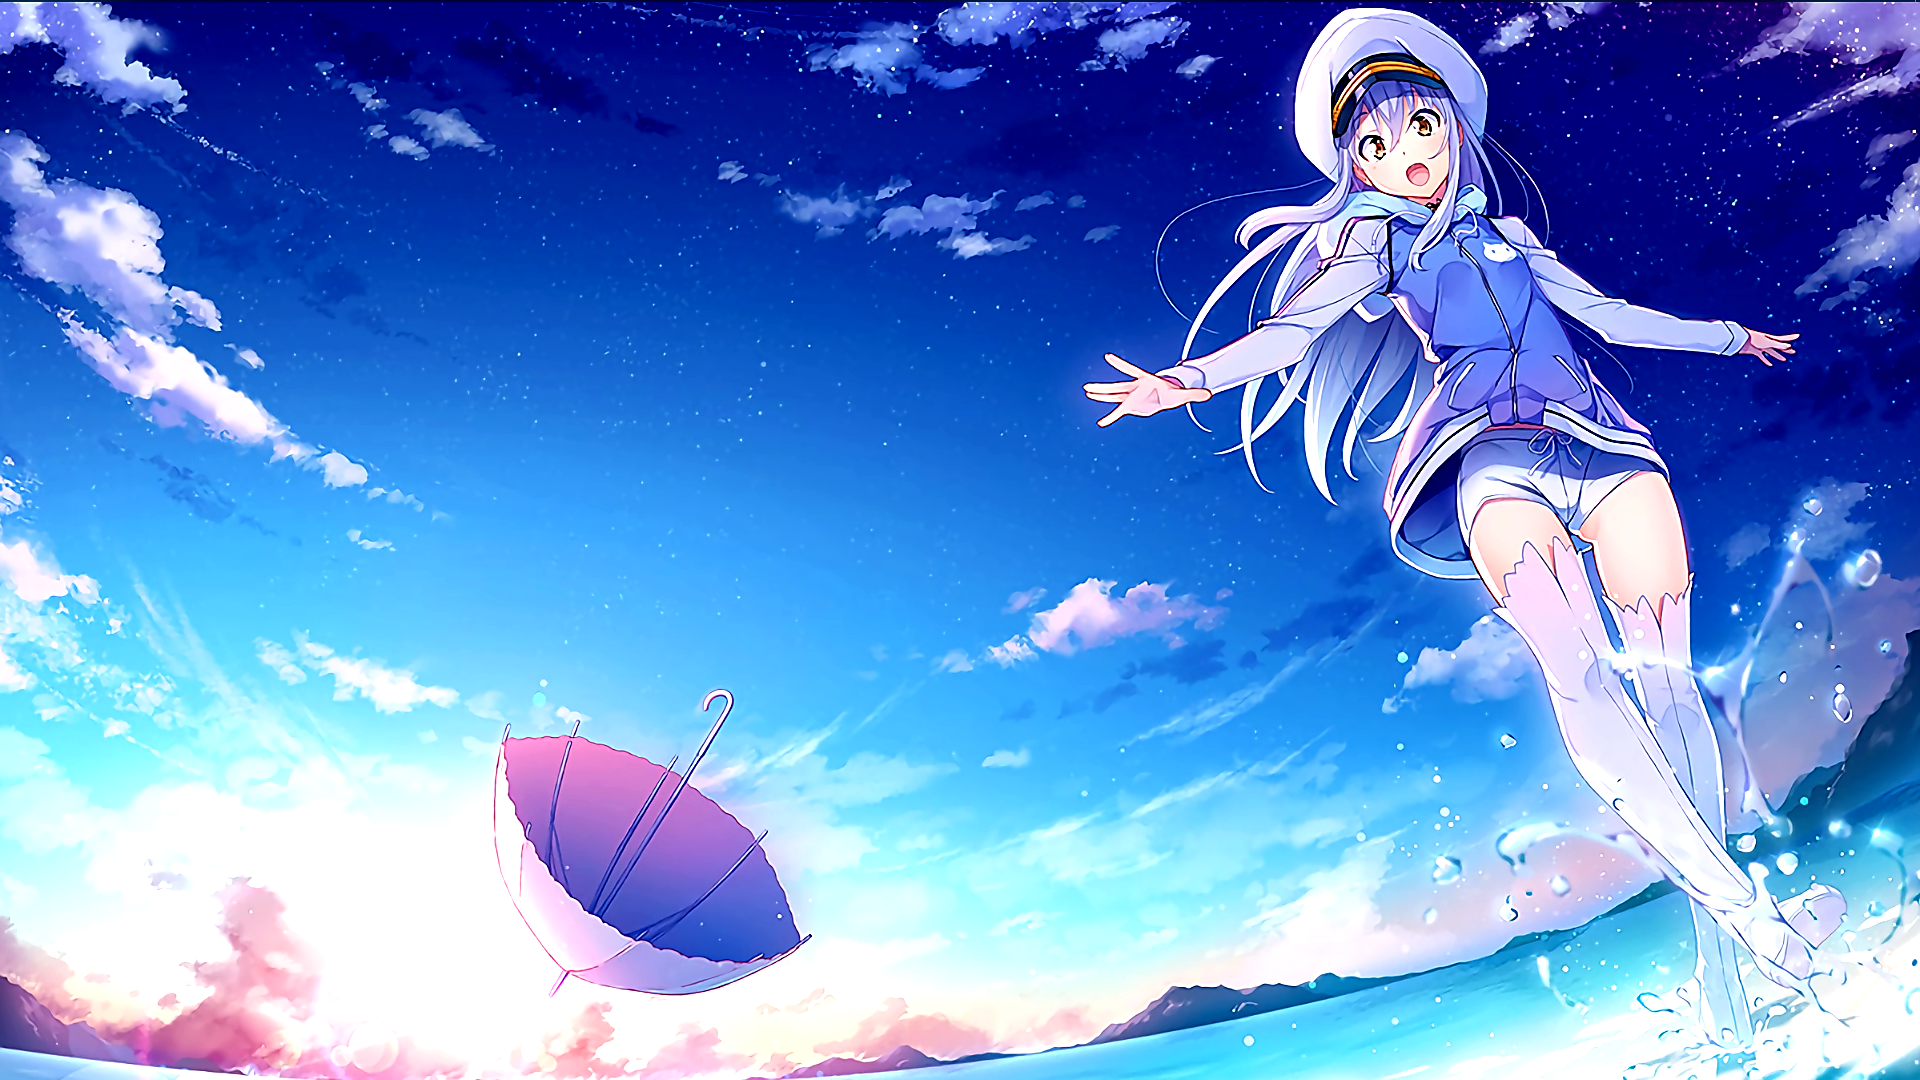 Hd Anime Backgrounds Png & Free Hd Anime Backgrounds.png Transparent Image